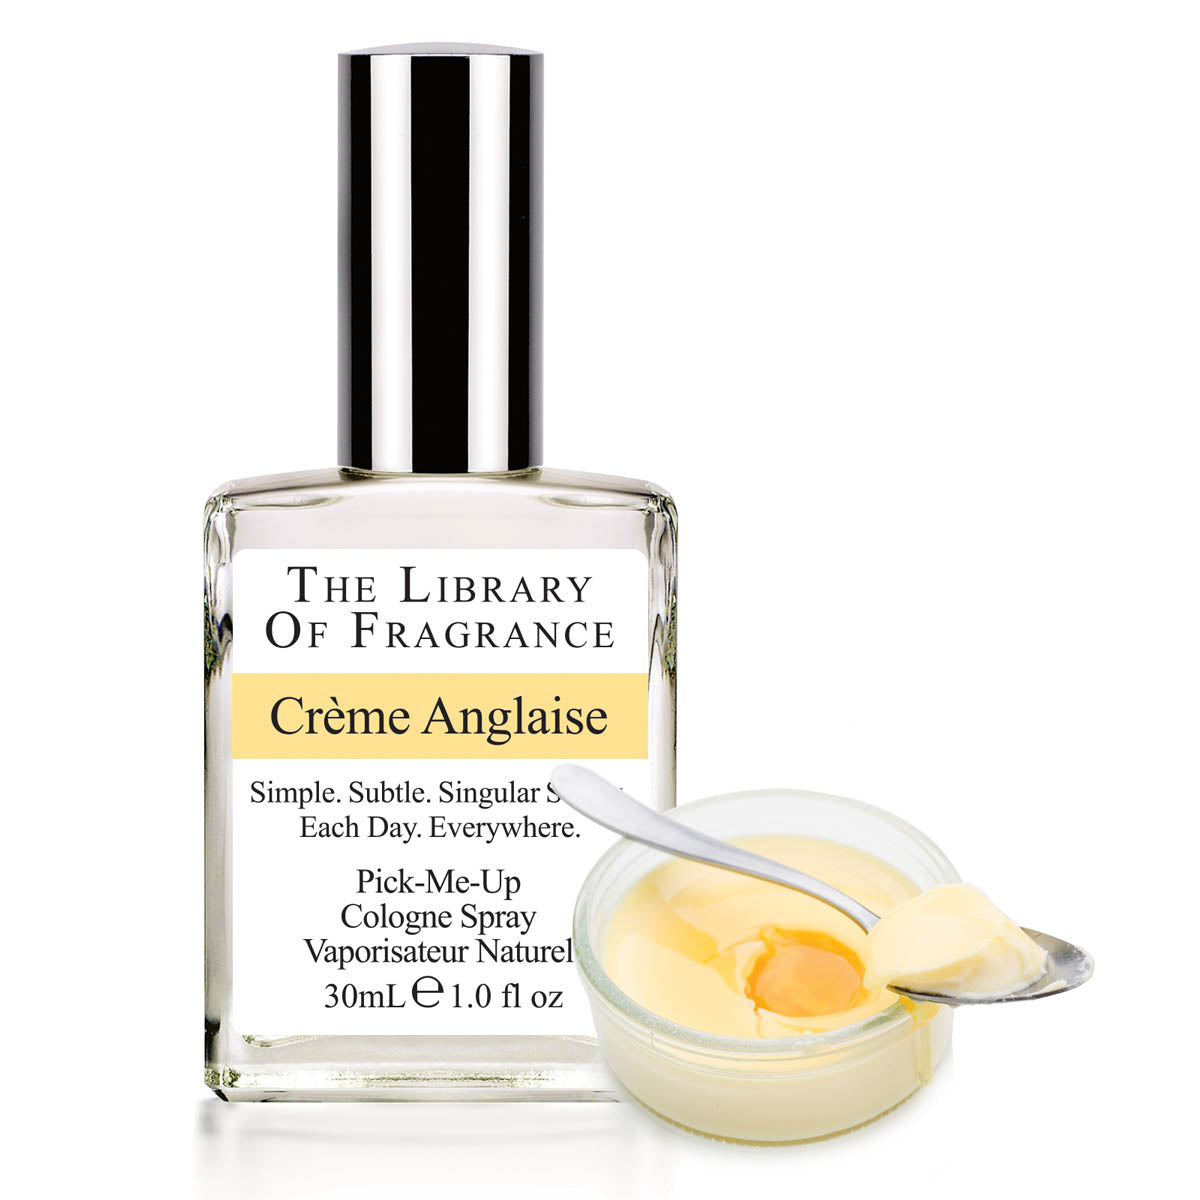 The Library Of Fragrance Crème Anglaise 30ml Cologne AKA Demeter Fragrance